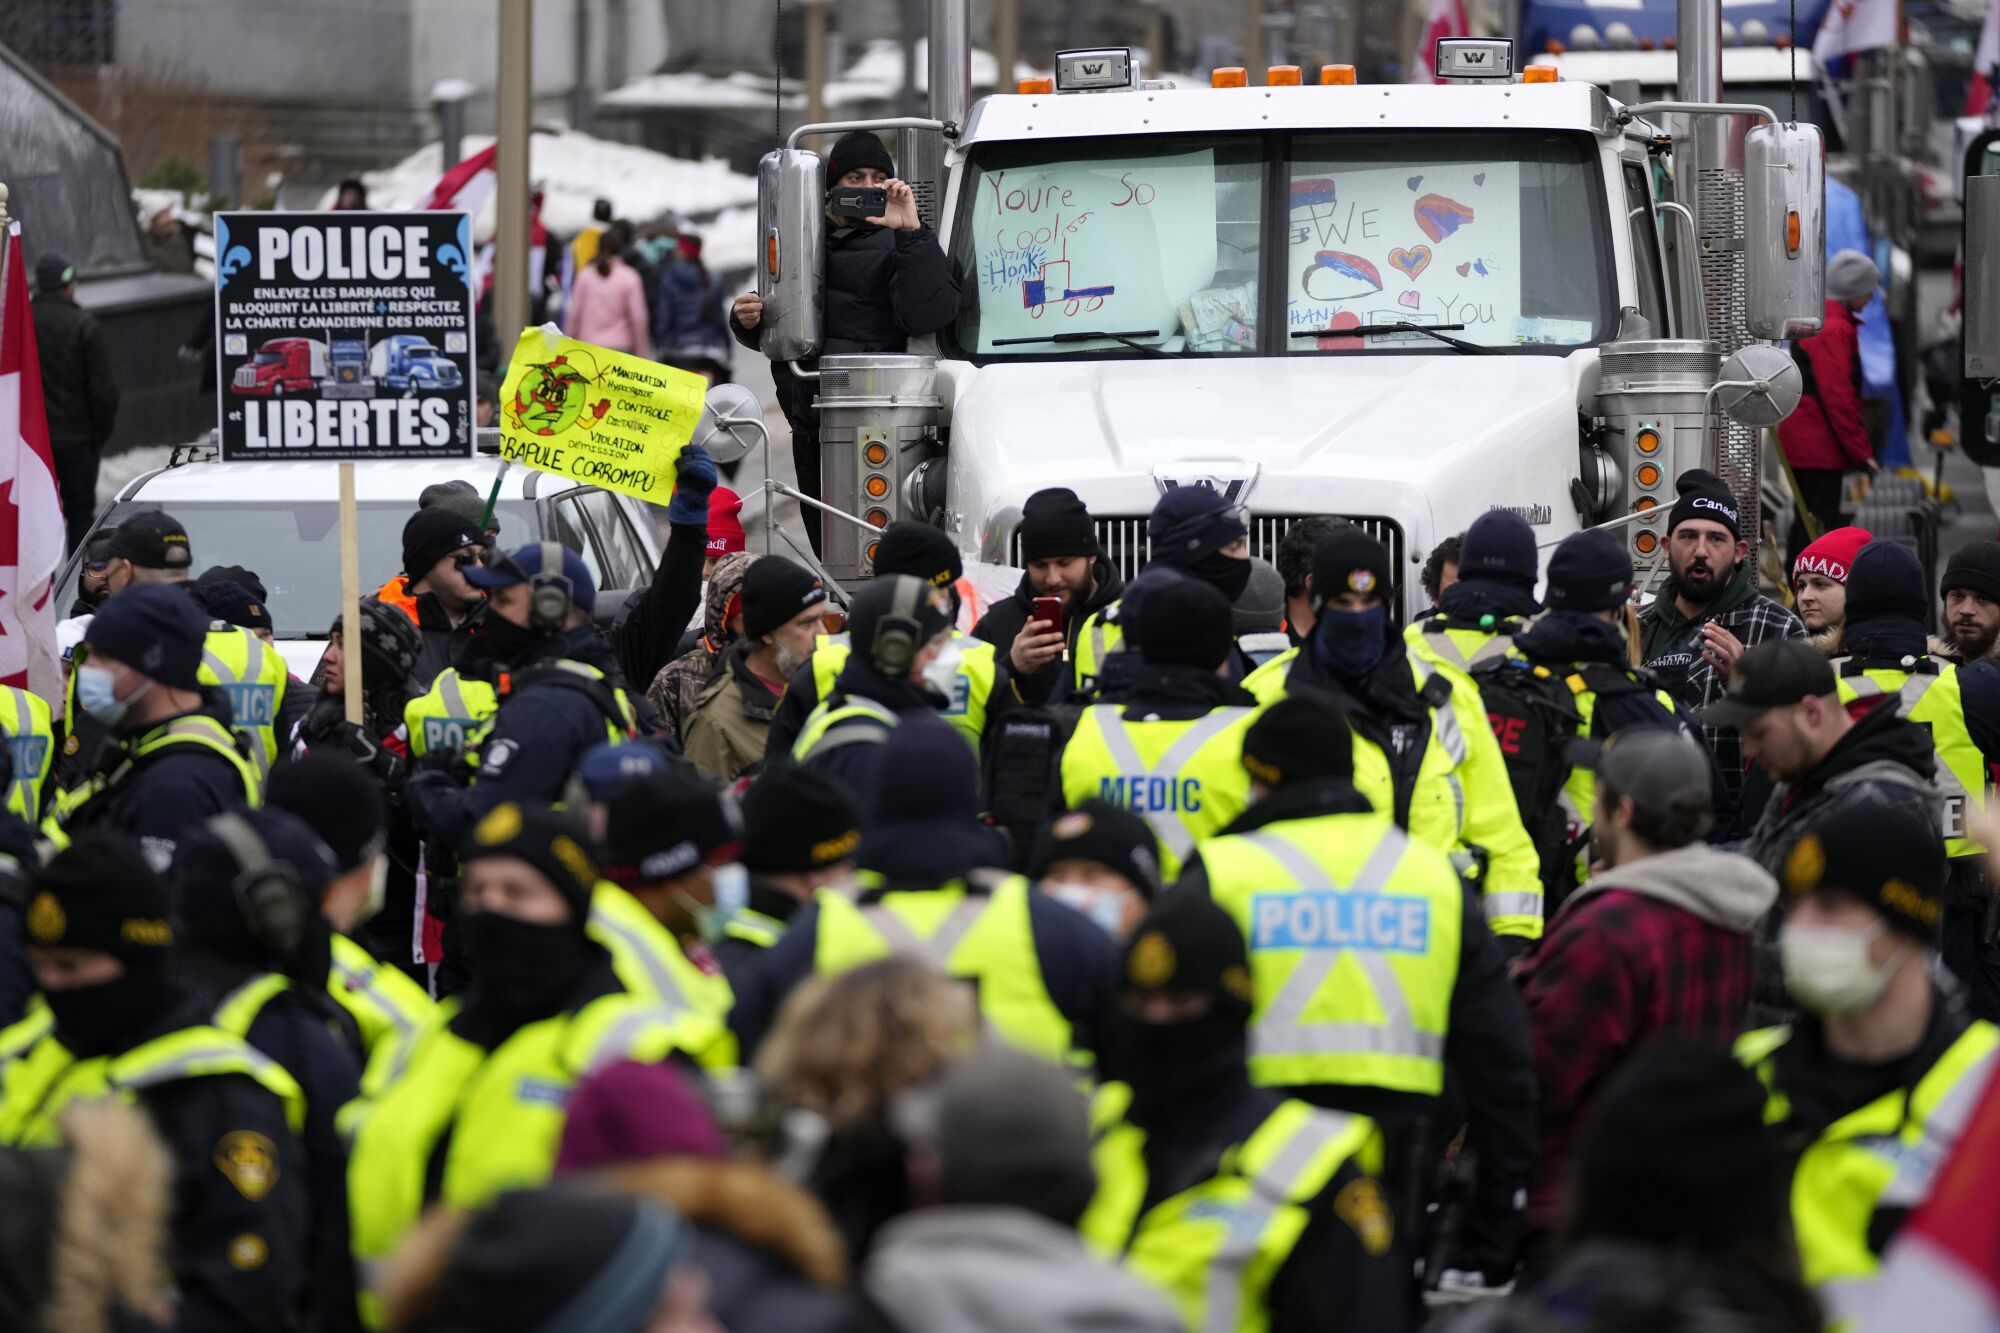 In a sea of yellow vests, some marked "police" or "medic," a  protester records the authorities 